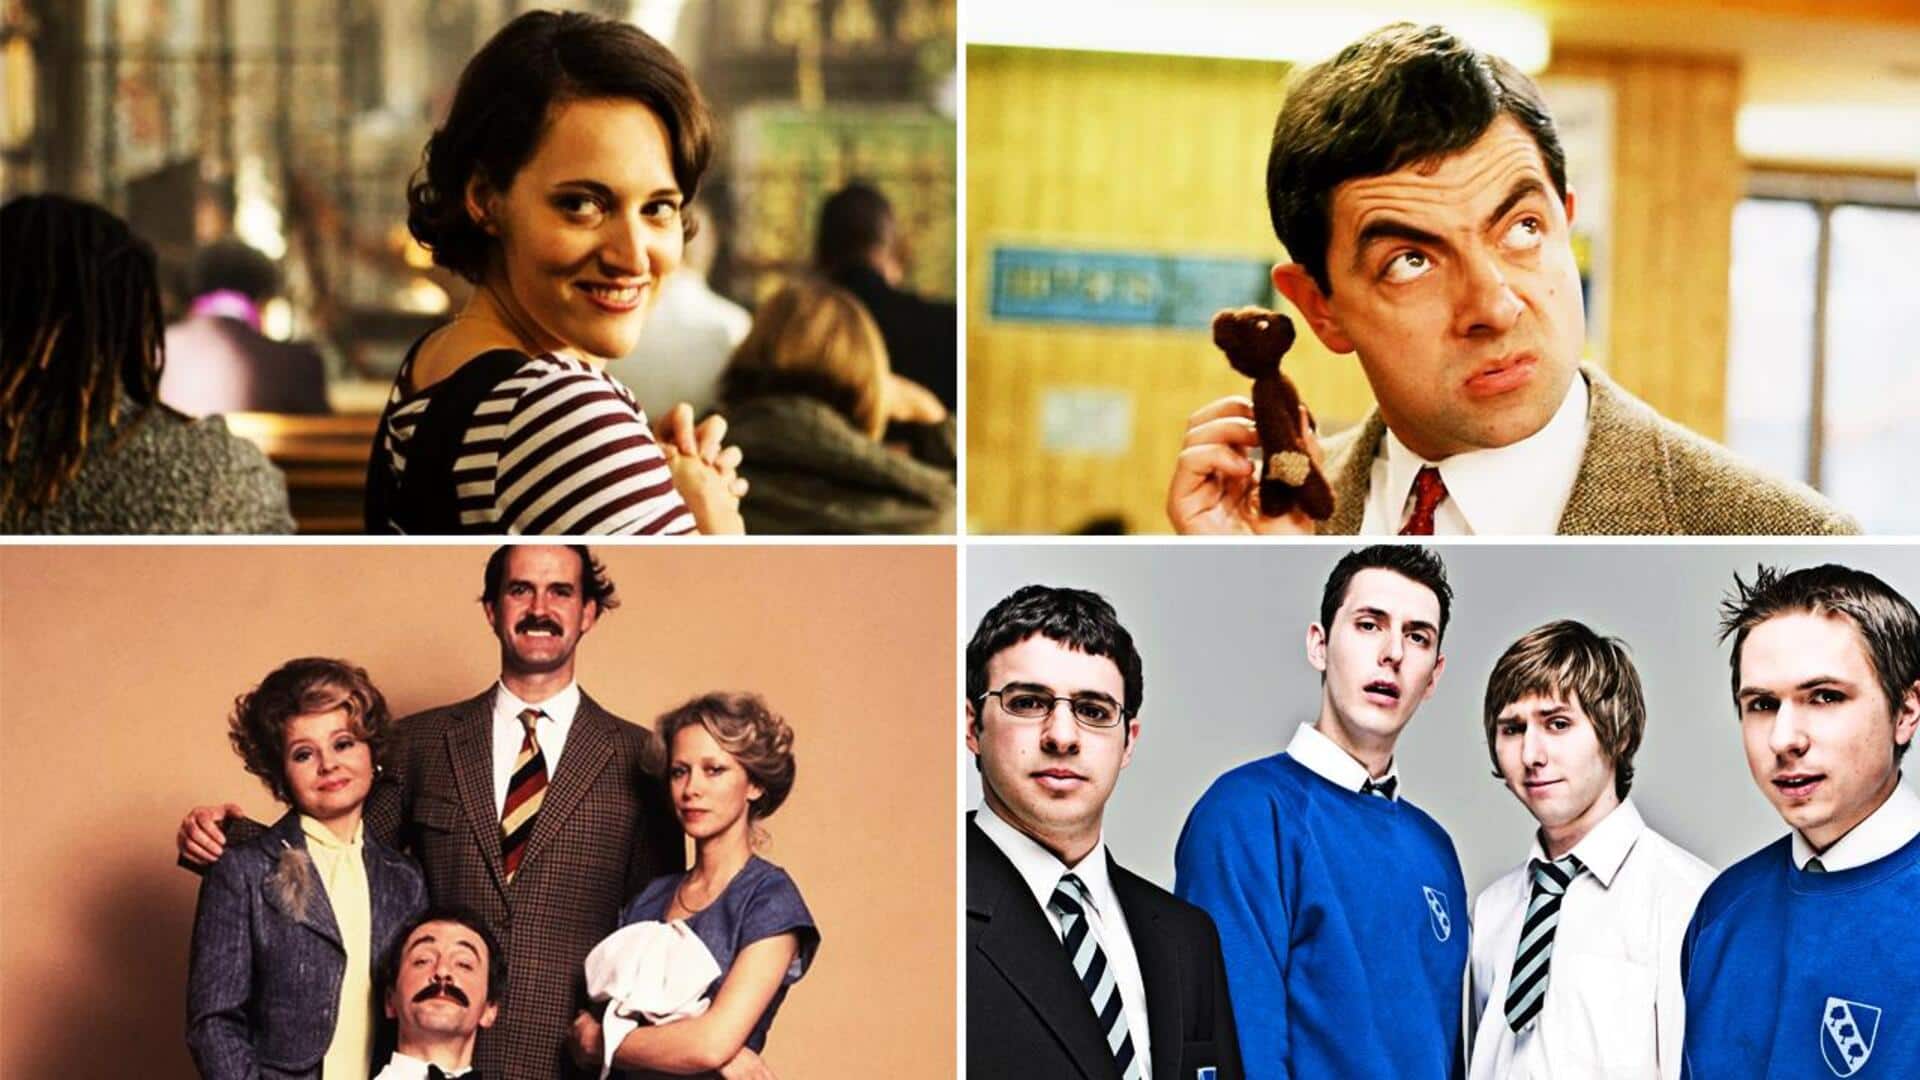 'Fawlty Towers' to 'Fleabag': Best British comedy shows 